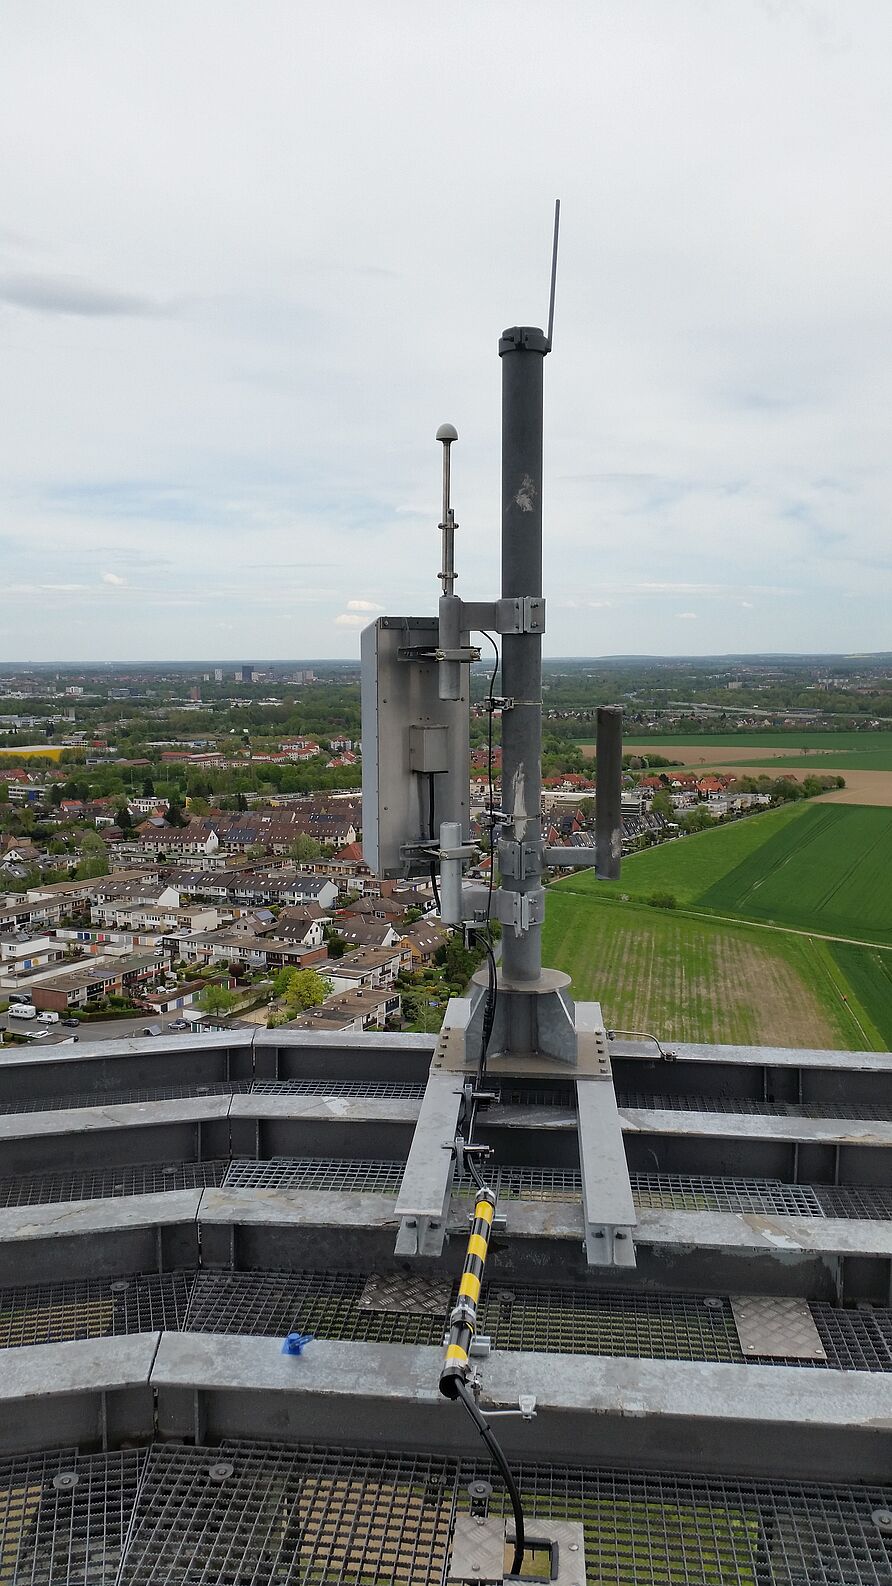 The installation of the transmitter on the platform 